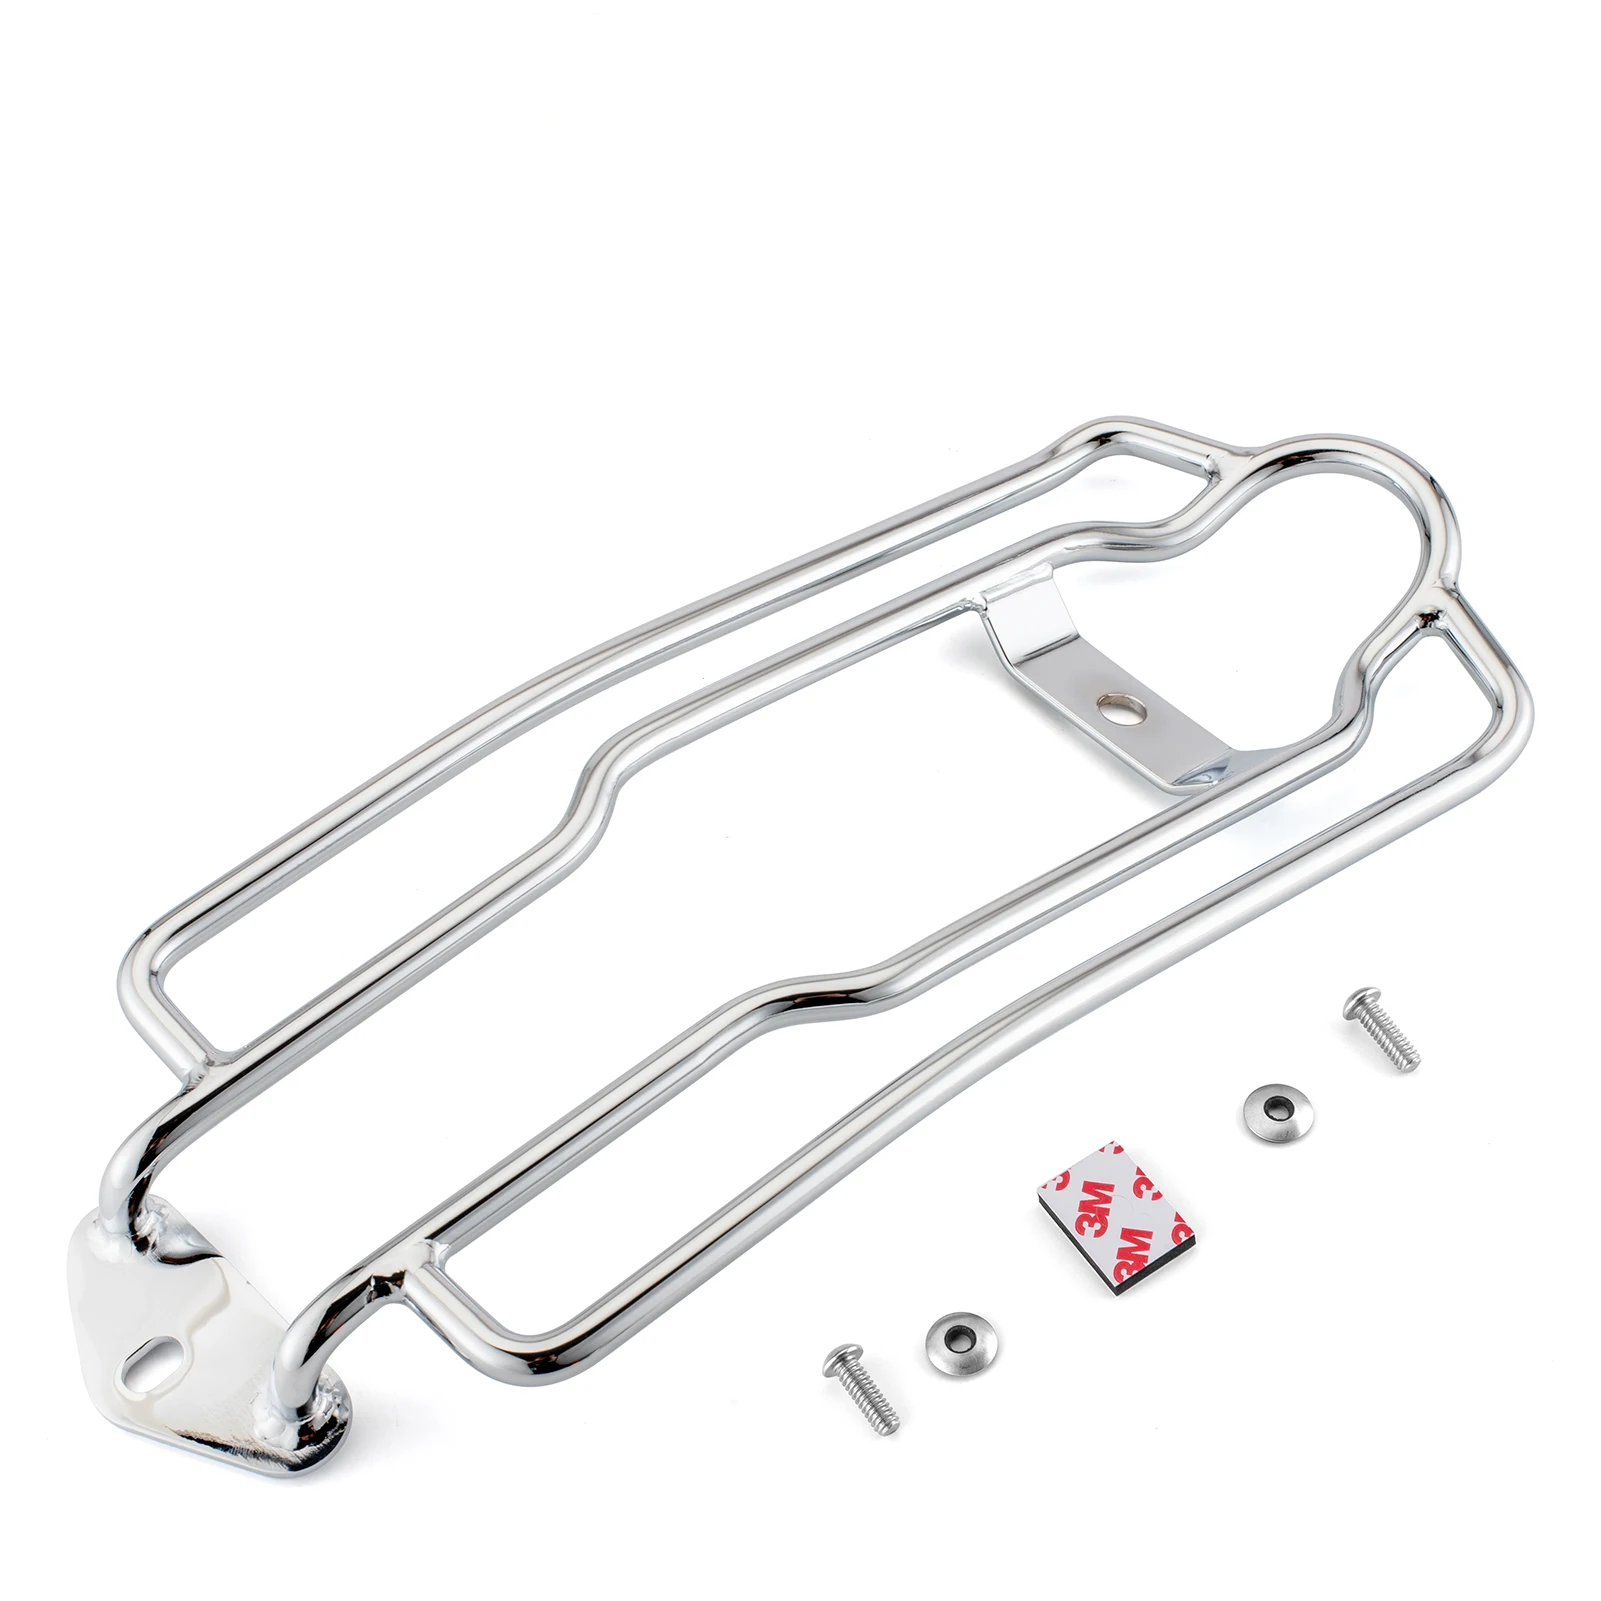 

Solo Seat Luggage Rack For 1985-2003 Harley Davidson XL883 1200 Sportster models with stock solo seat